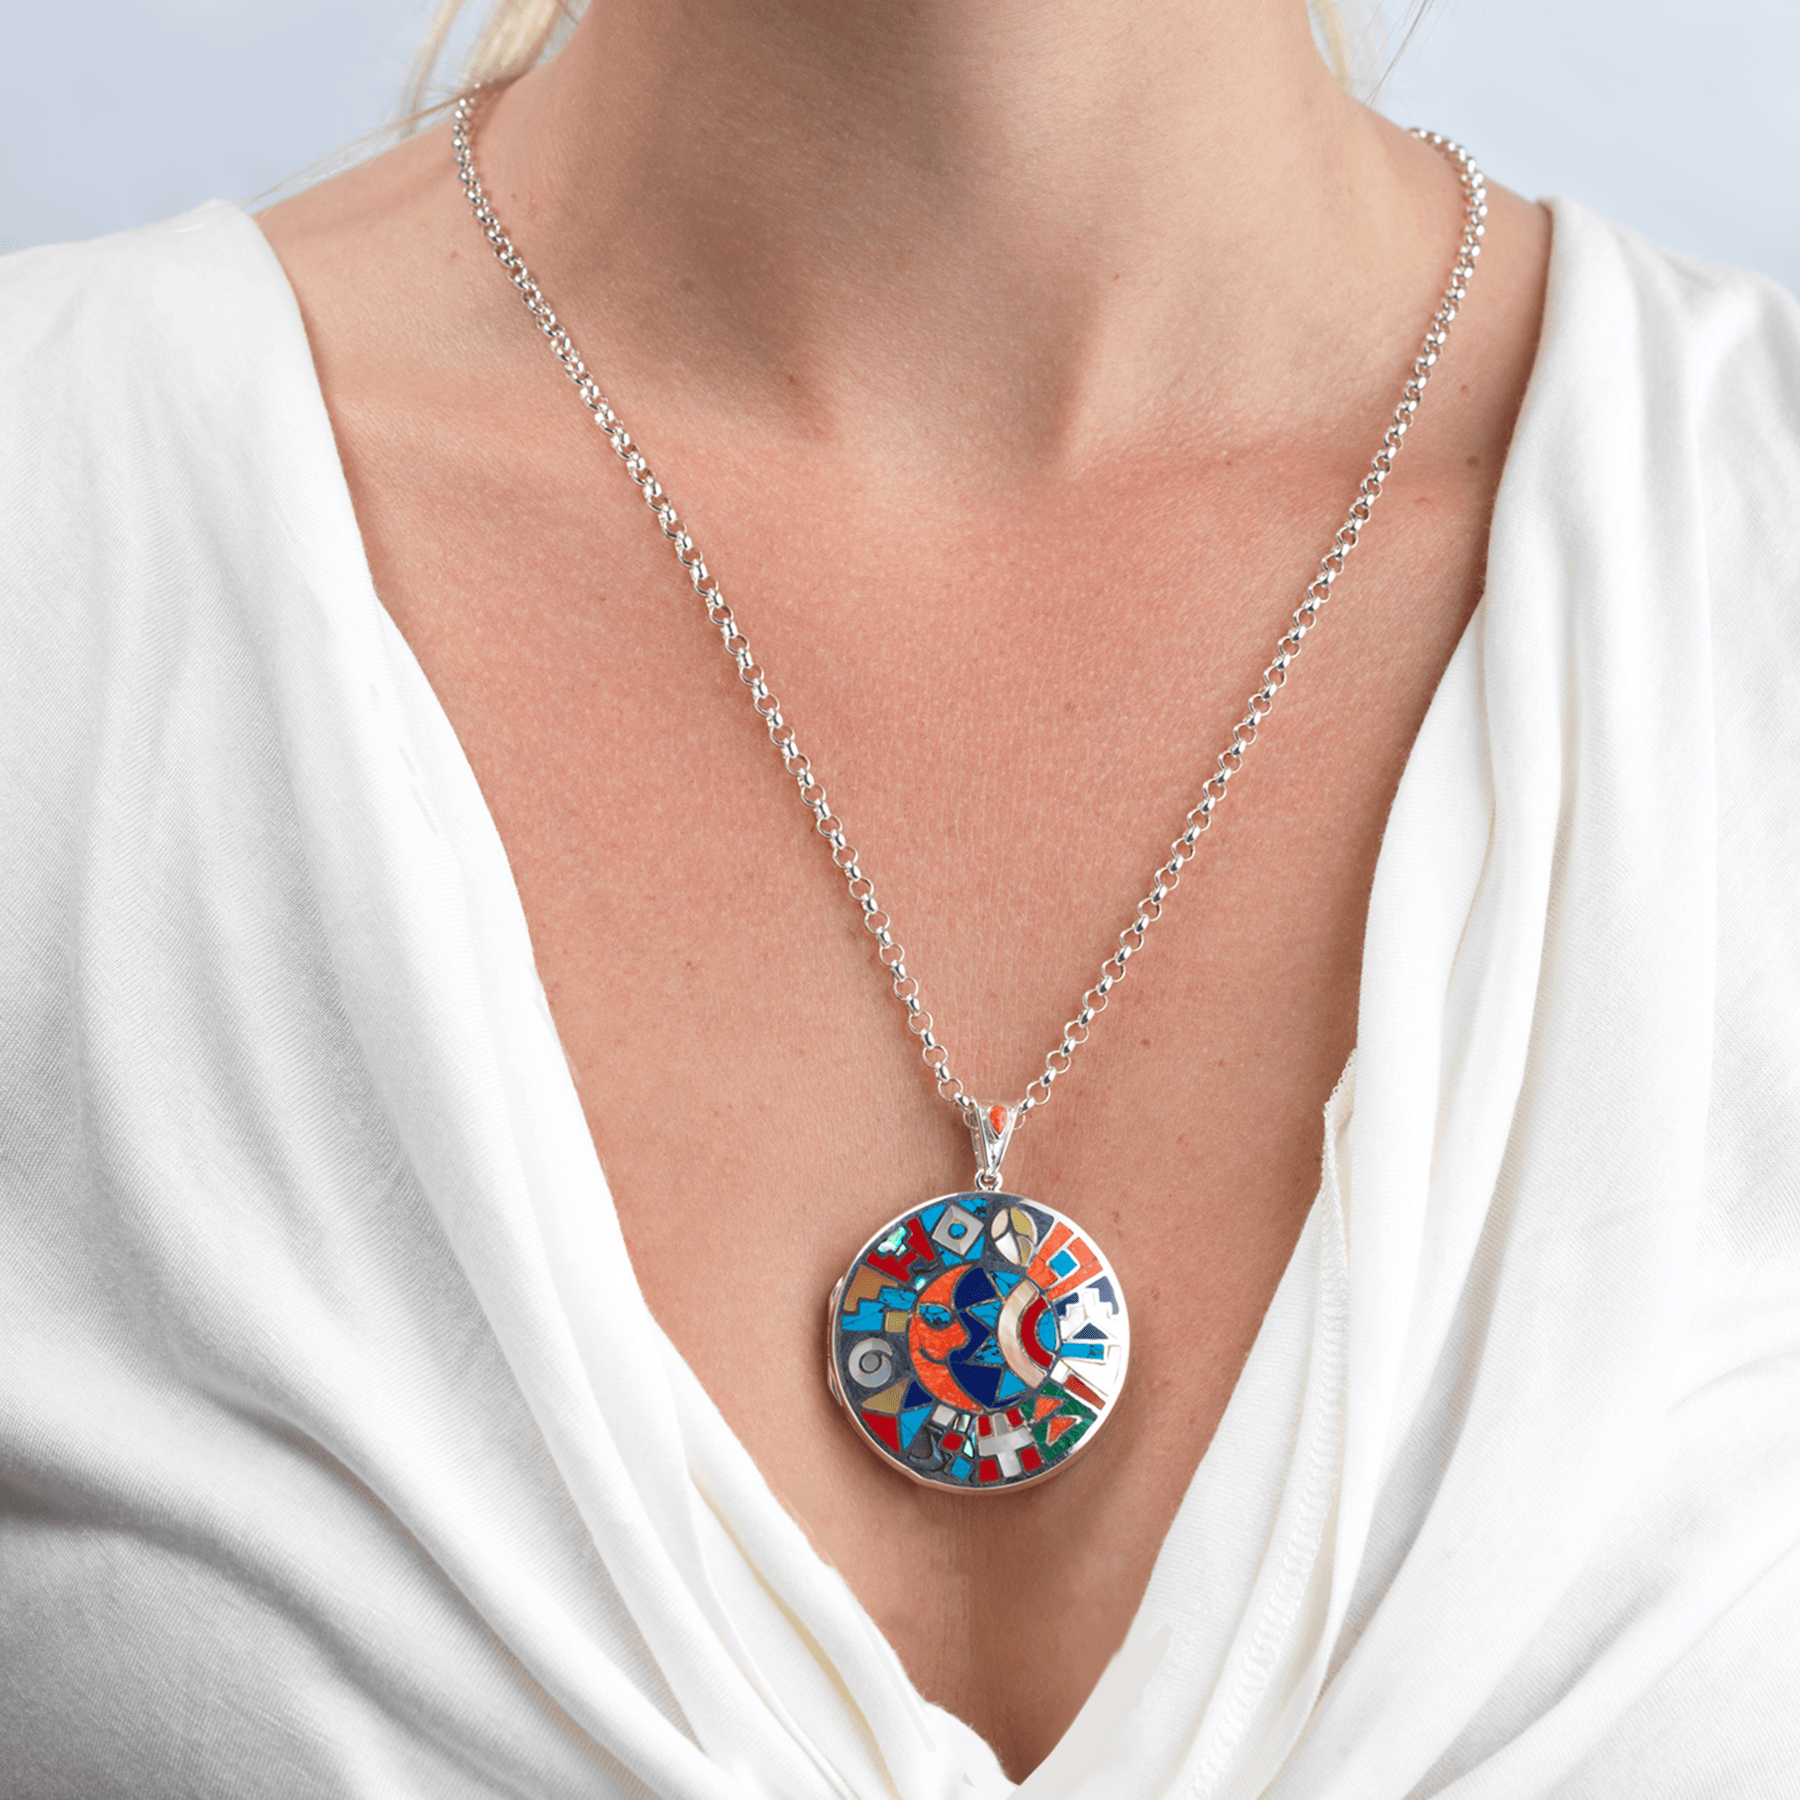 Product title: XL Sun and Moon Mosaic Locket 39 mm, product type: Locket